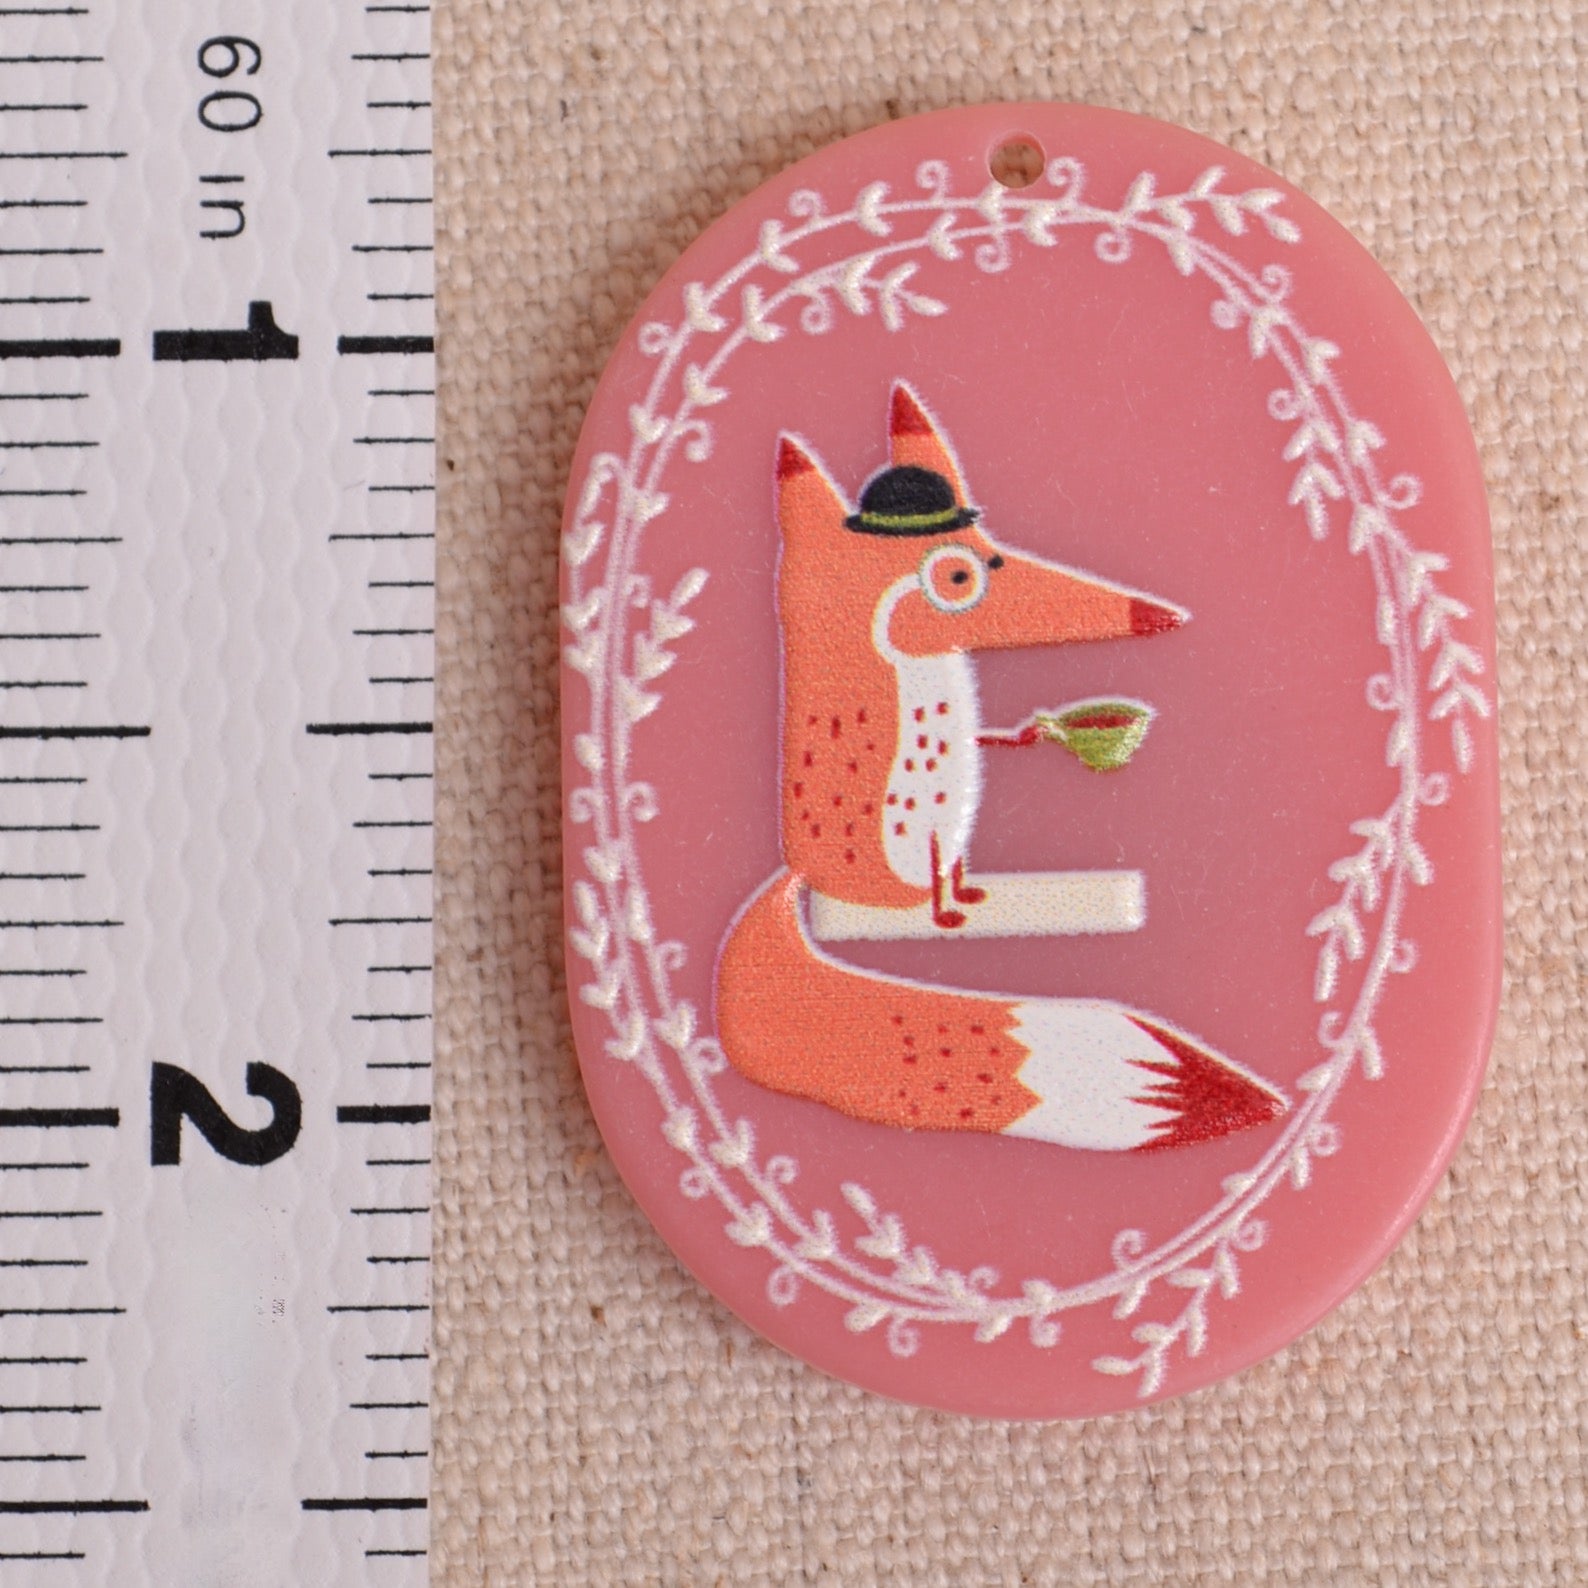 Gentleman fox on needle minder suggests you take a break and have a cup of tea 